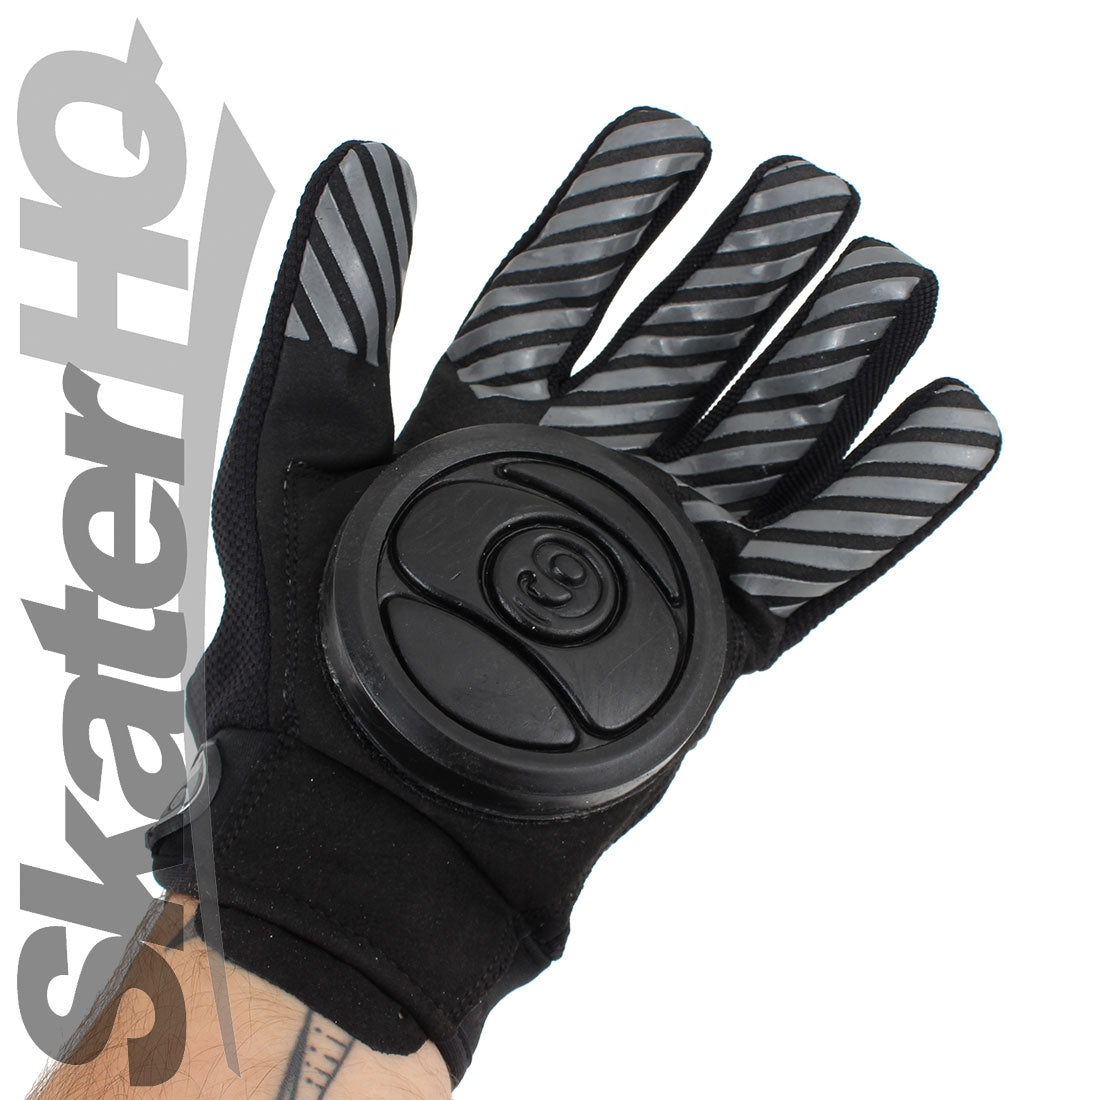 Sector 9 Apex Stealth Glove - S/M Protective Gear